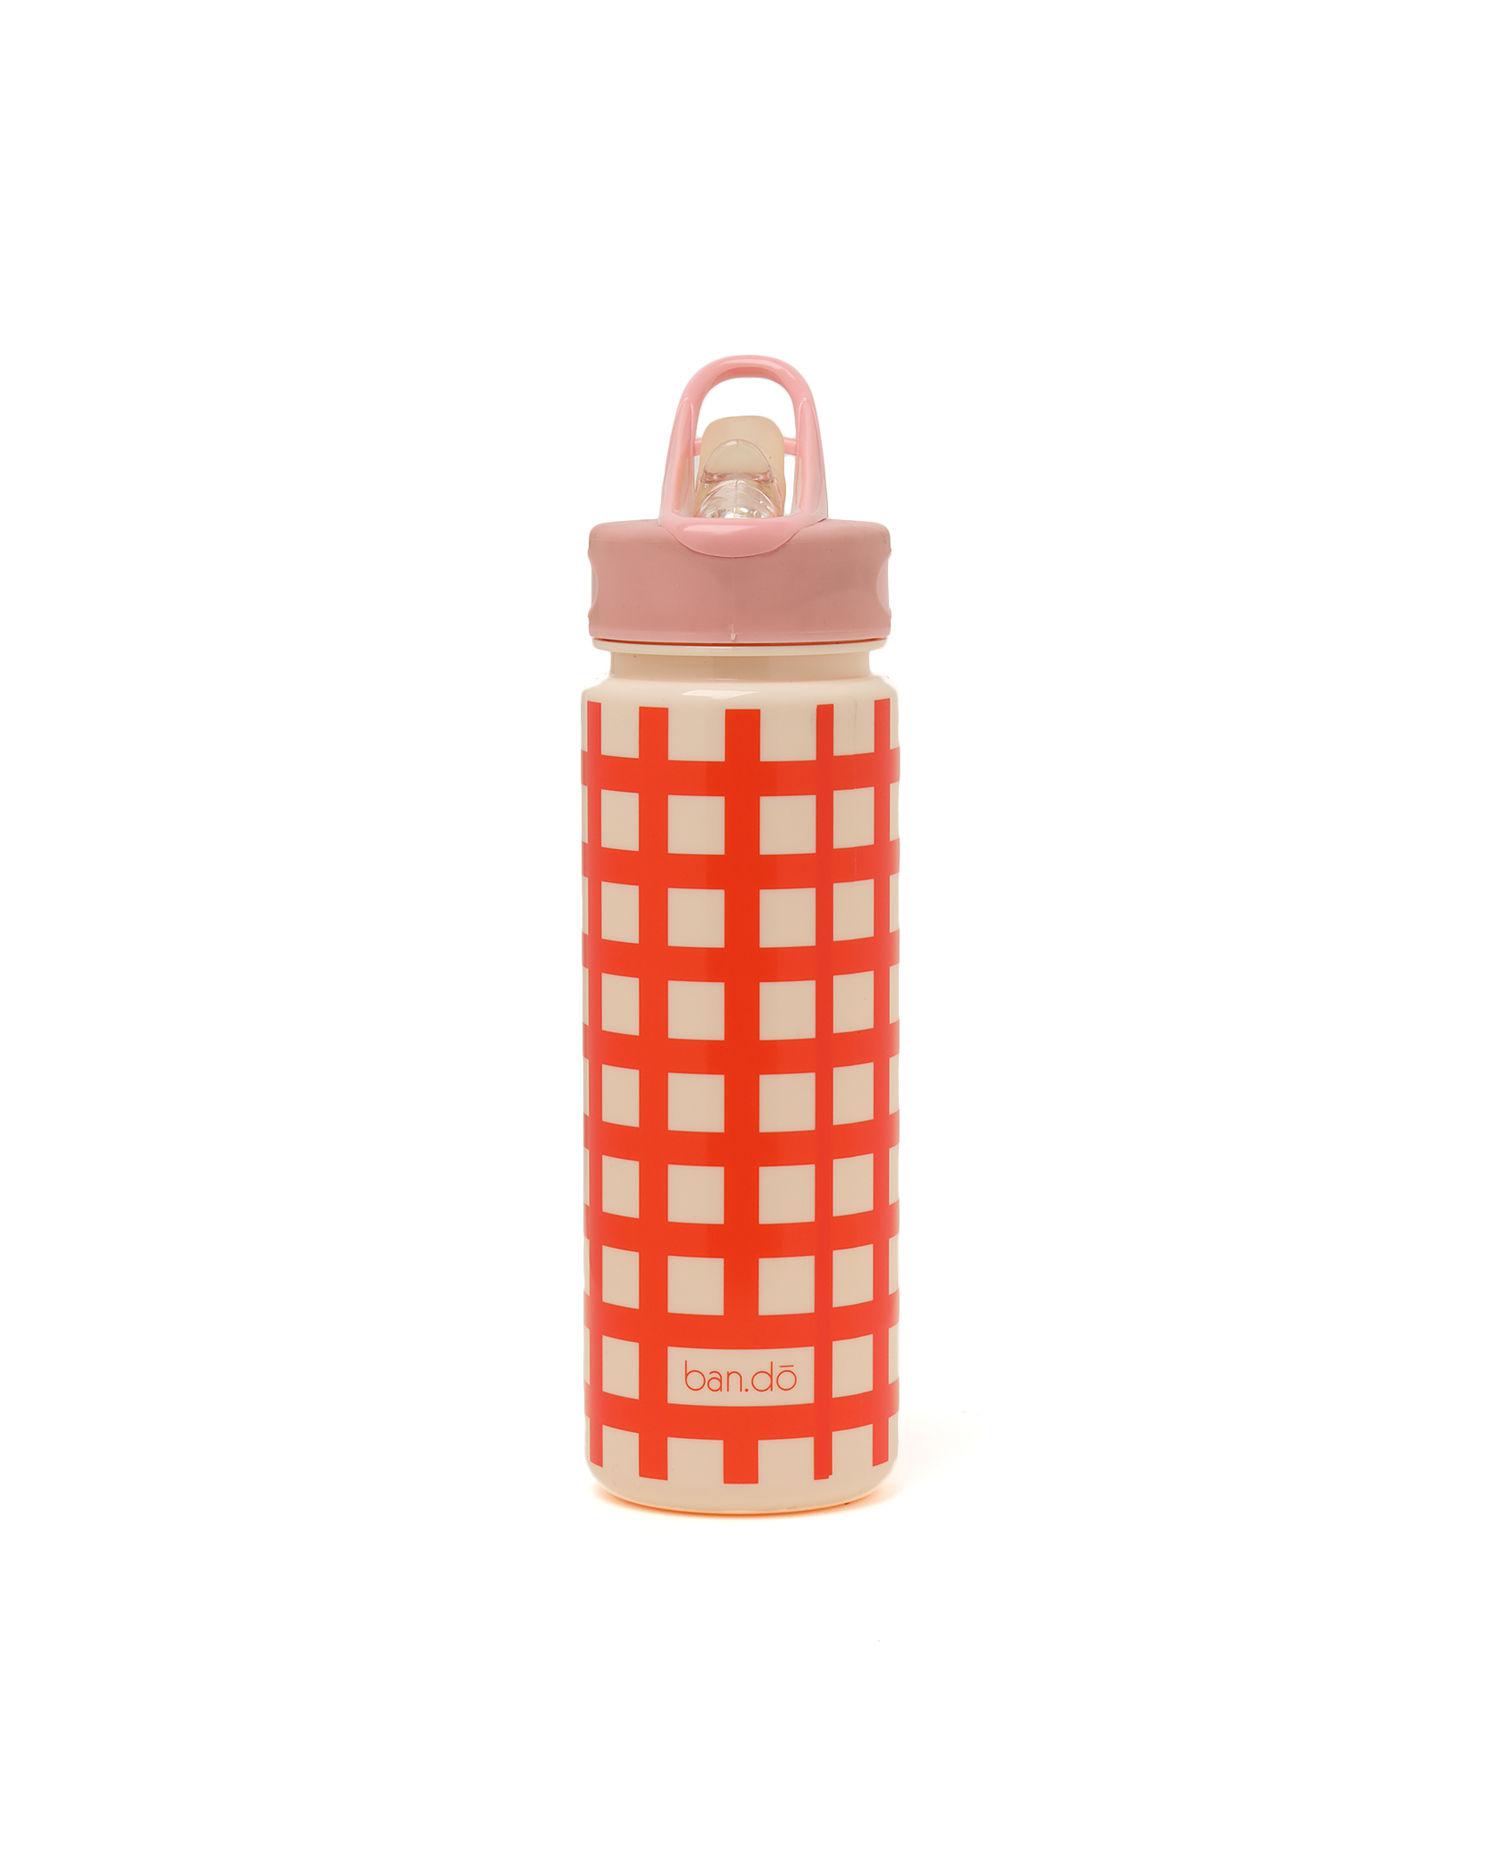 Checker water bottle by BAN.DO